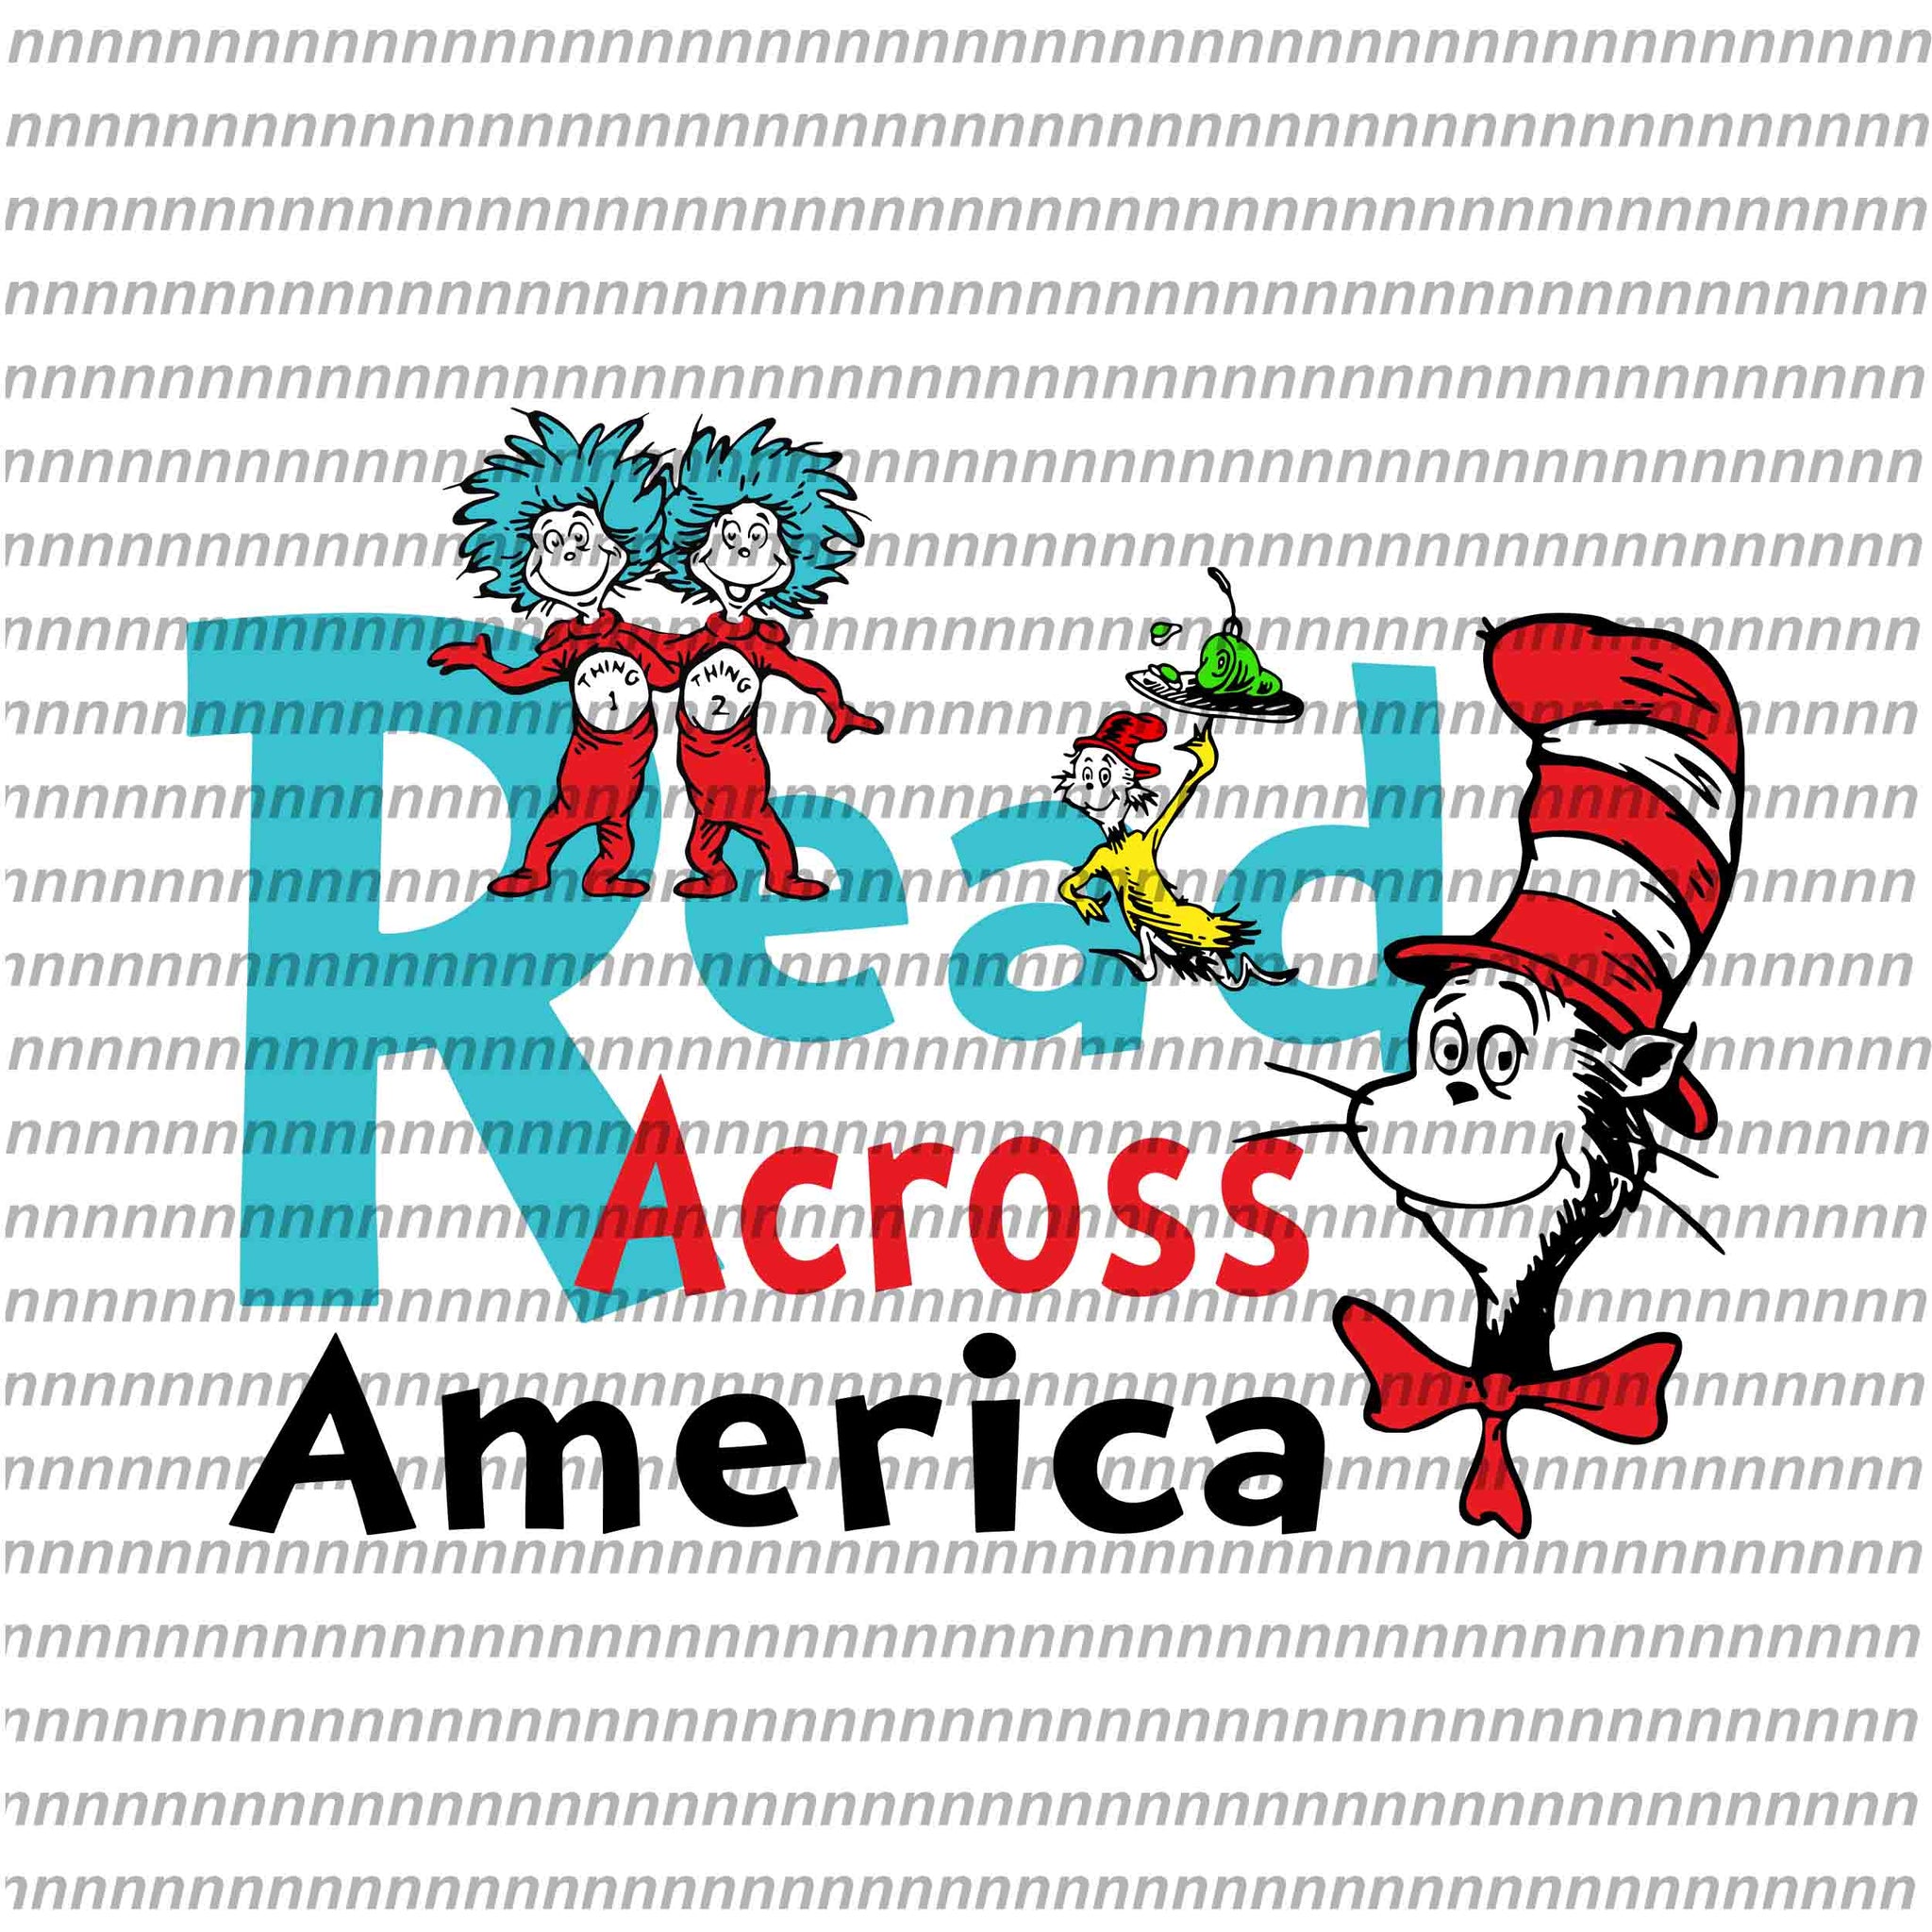 Read across america, dr seuss svg, dr seuss quote, dr seuss design, Cat in the hat svg, thing 1 thing 2 thing 3, svg, png, dxf, eps file